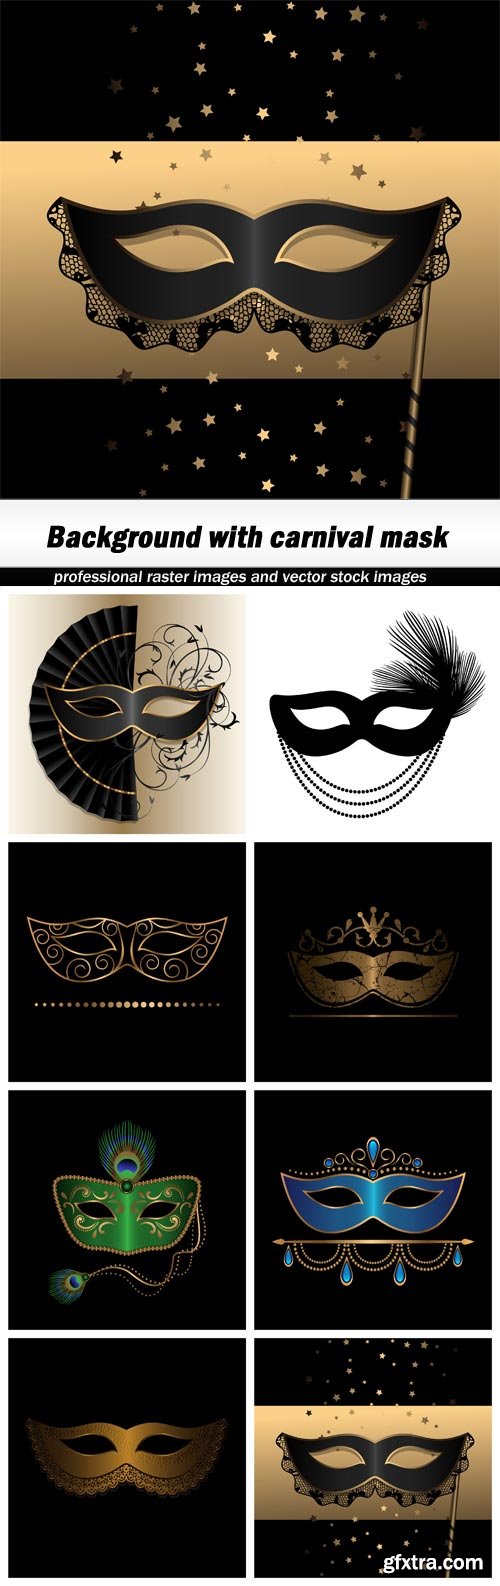 Background with carnival mask - 8 EPS